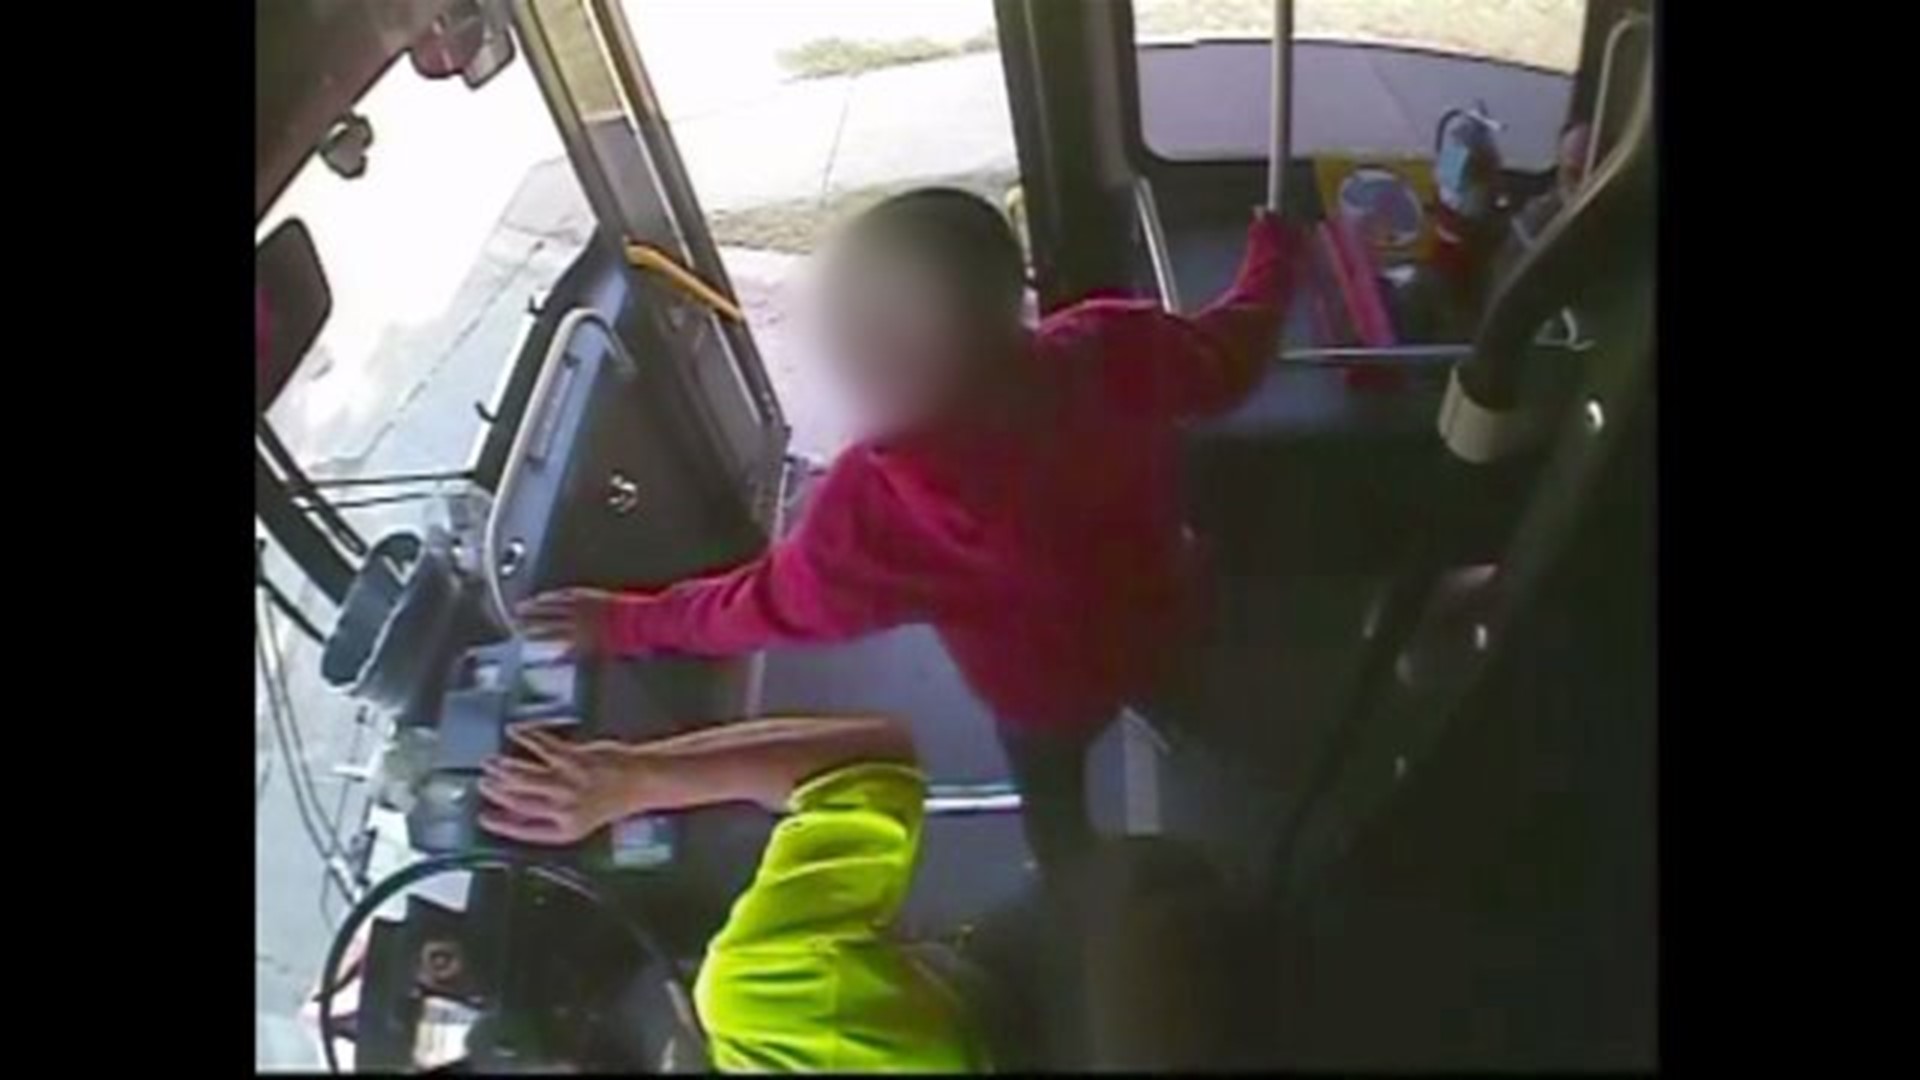 Watch: Teen charged after reported assault on Davenport Citibus